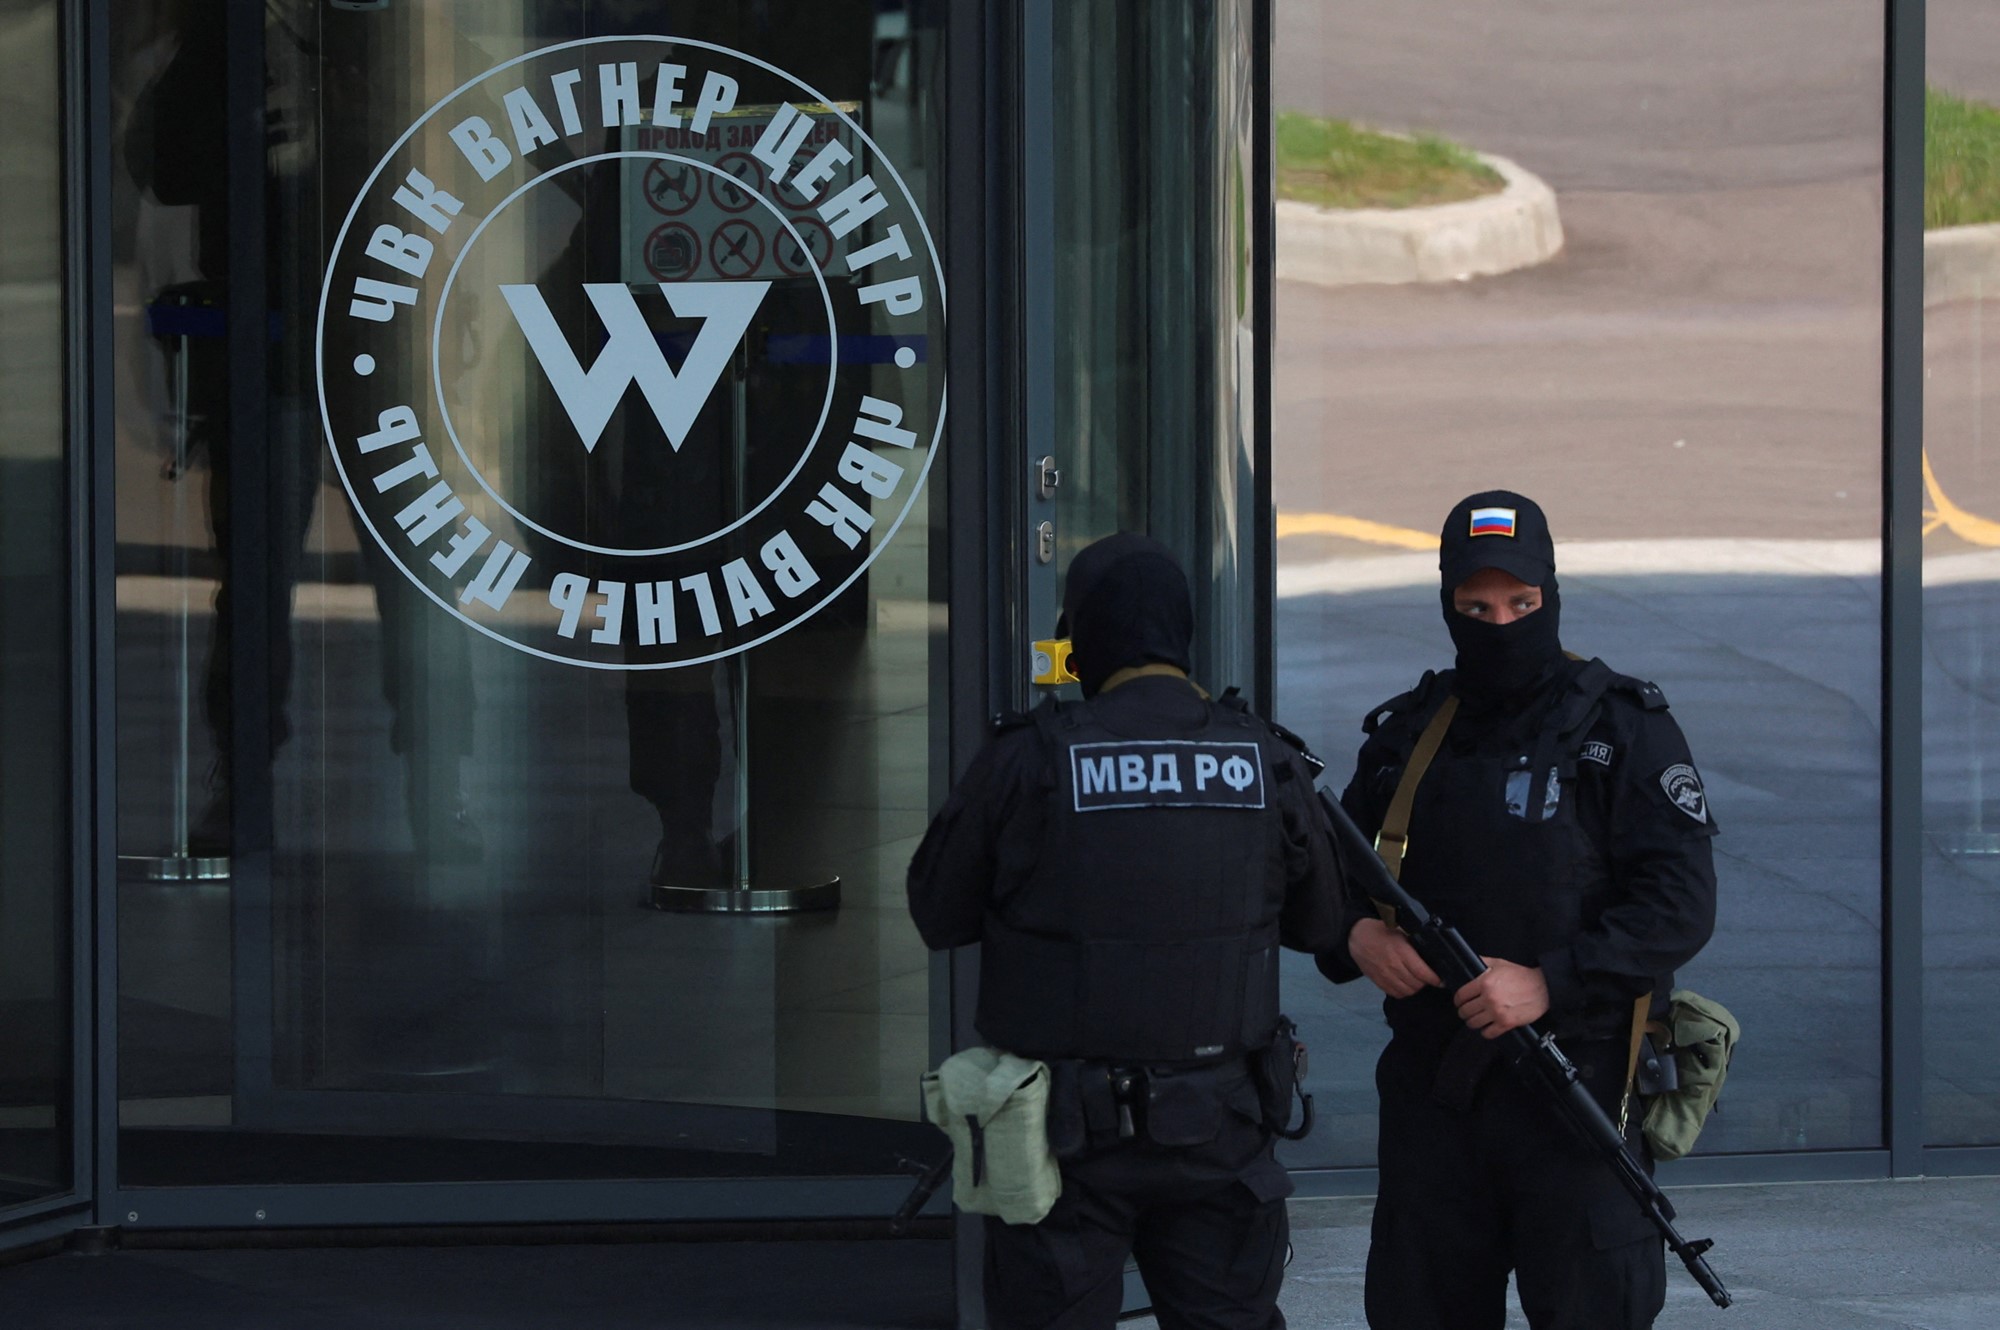 Two armed police stand outside a building with the Wagner logo on its glass walls